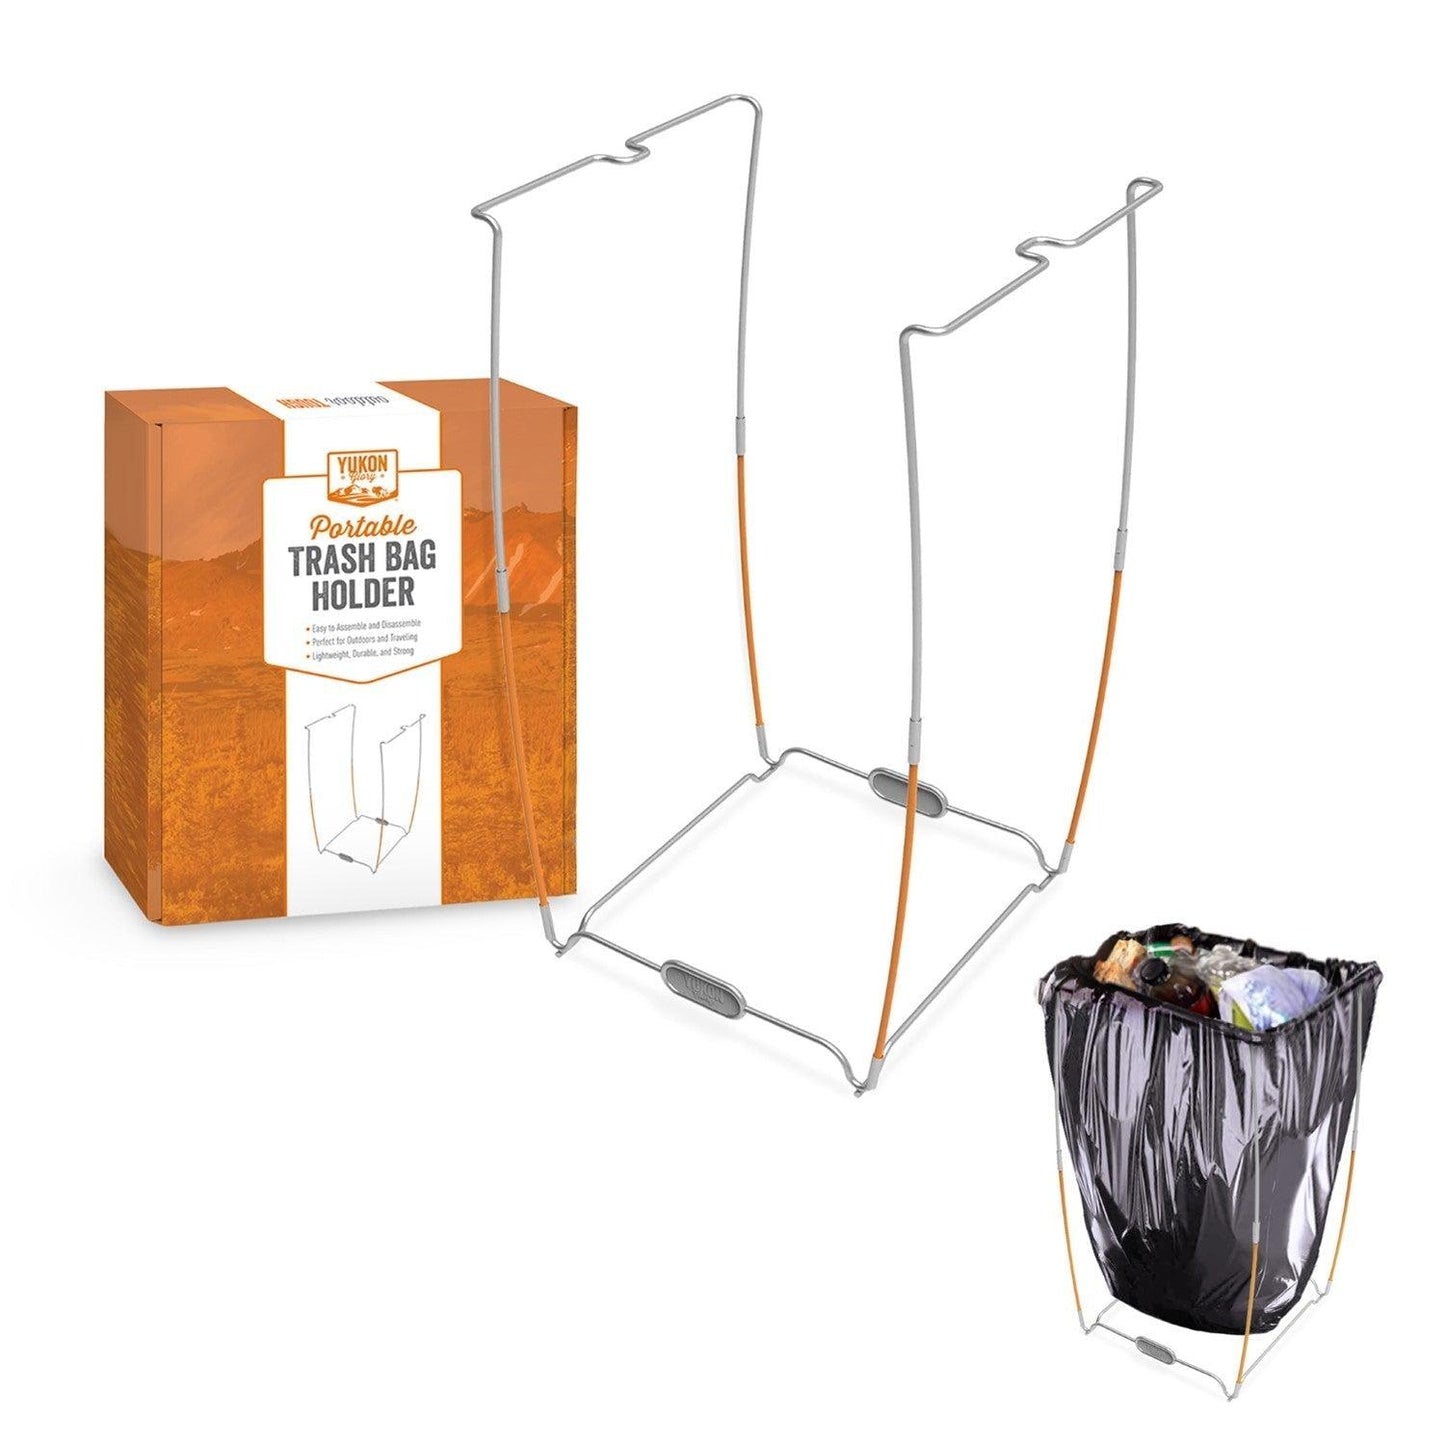 Yukon Glory Trash Bag Holder | Stainless Steel Support Stand | Camping Bag Holder | Acts As Outdoor Garbage Can | Collapsible Trash Bag Organizer | Includes Carry Bag | 13 Gallon Plastic Bag Holder